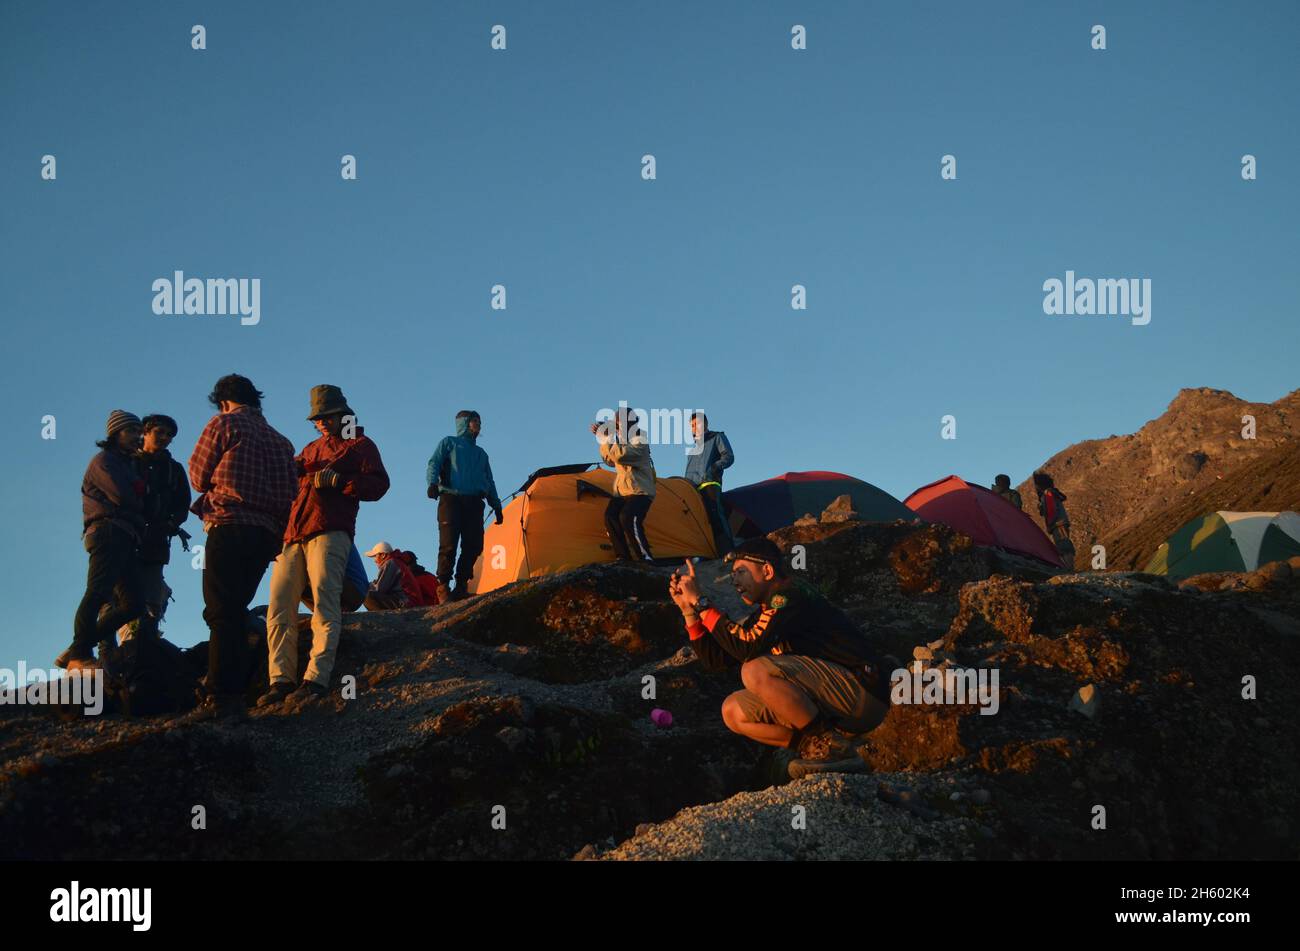 Boyolali, Indonesia. 16 may 2015. Climbing Mount Merapi for the last time. Stock Photo